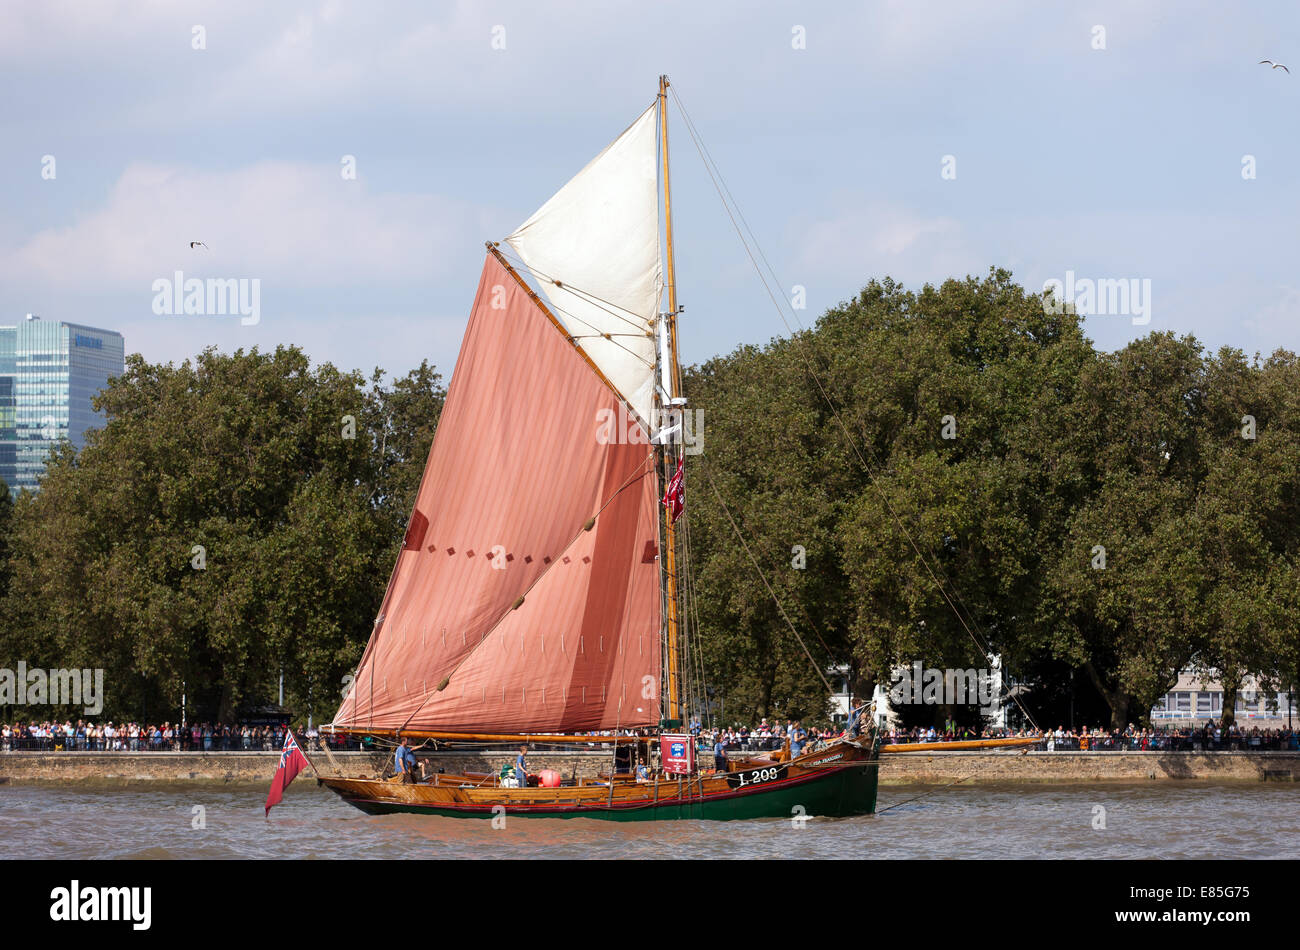 Eda Frandsen, a 65 foot  wooden sailing yacht, taking part in the parade of Sale, during the Tall Ships Festival, Greenwich. Stock Photo